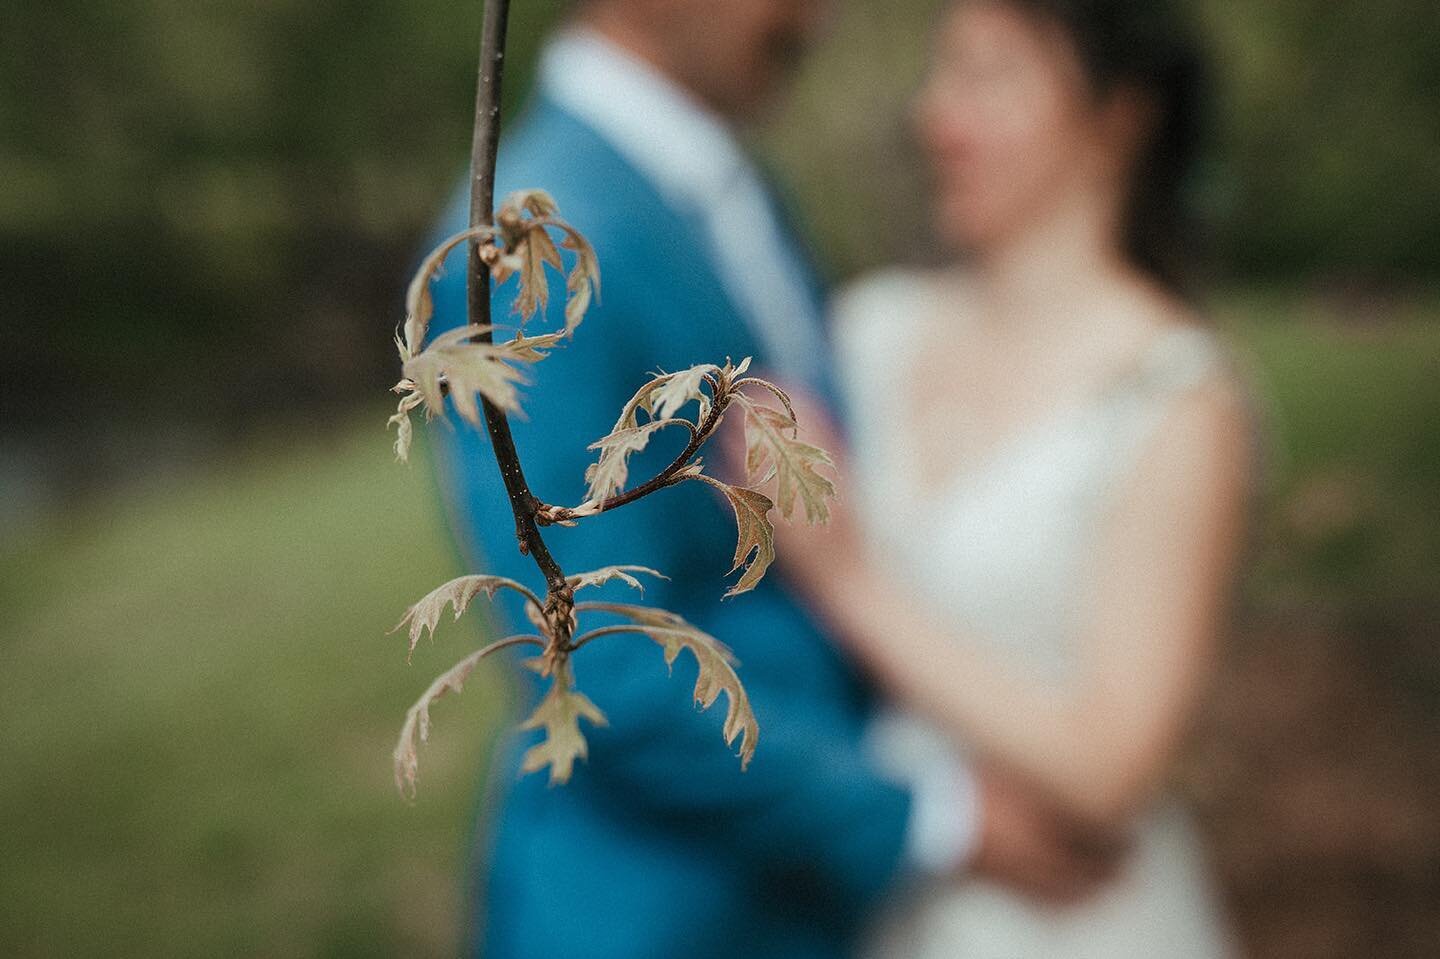 When you tell me your love of oaks, I will treat them as much a part of your wedding as a beloved guest. 

What an exceptionally genuine + joyous wedding weekend! 

More to come . . 🌱🌱🌱

@evanqg 
@mountain_springs_cabins